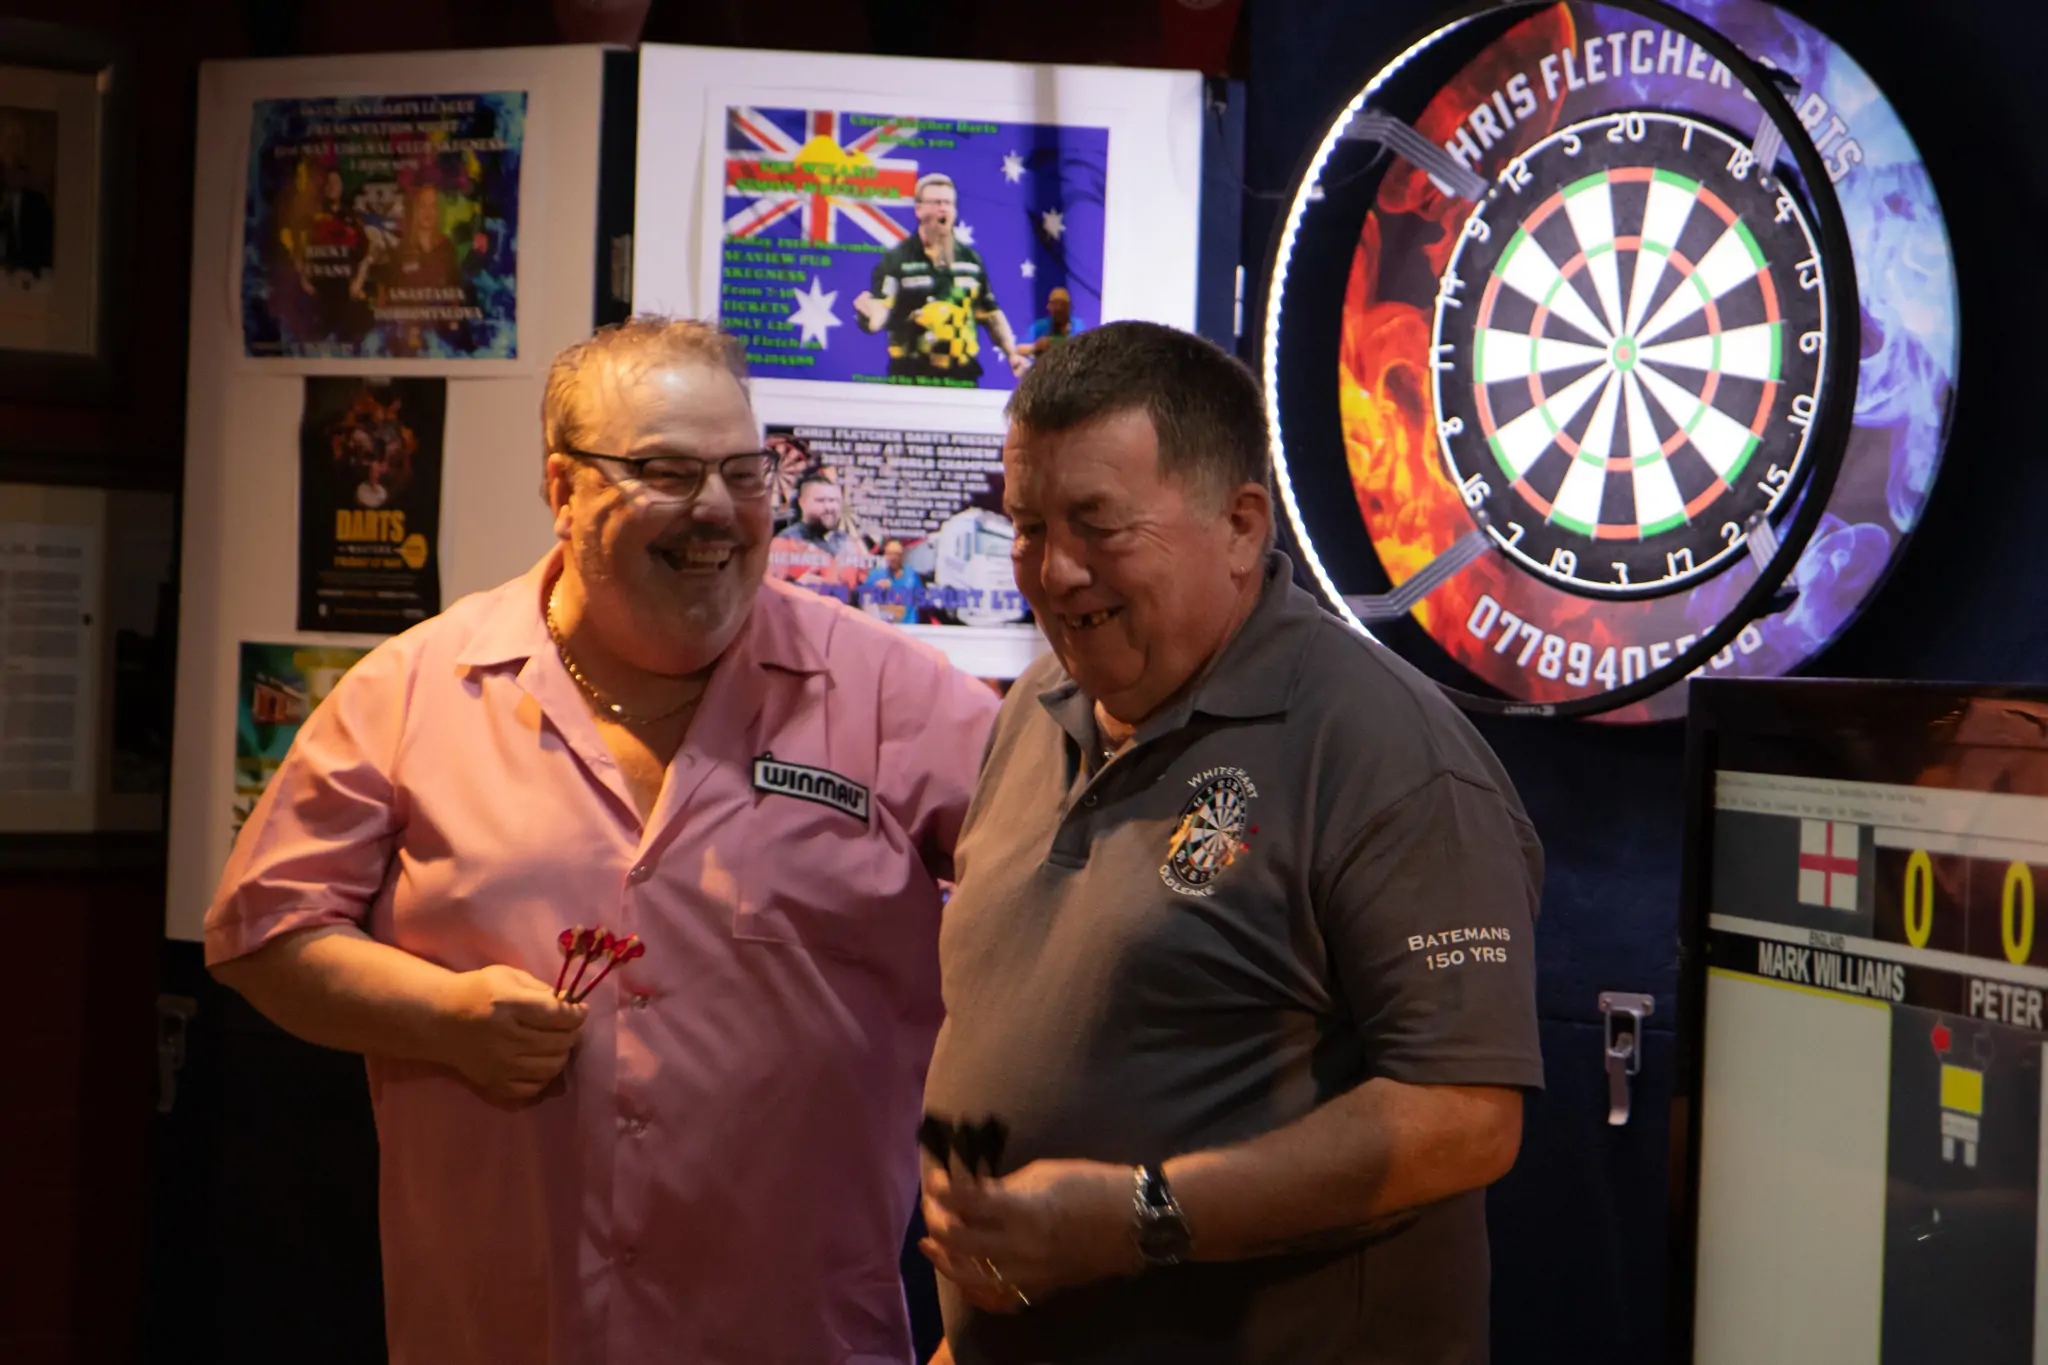 Peter Manley Pro Darts Player at the Batemans 150th anniversary celebrations darts with one of the competitors Mark Williams landlord from The White Hart, Old Leake